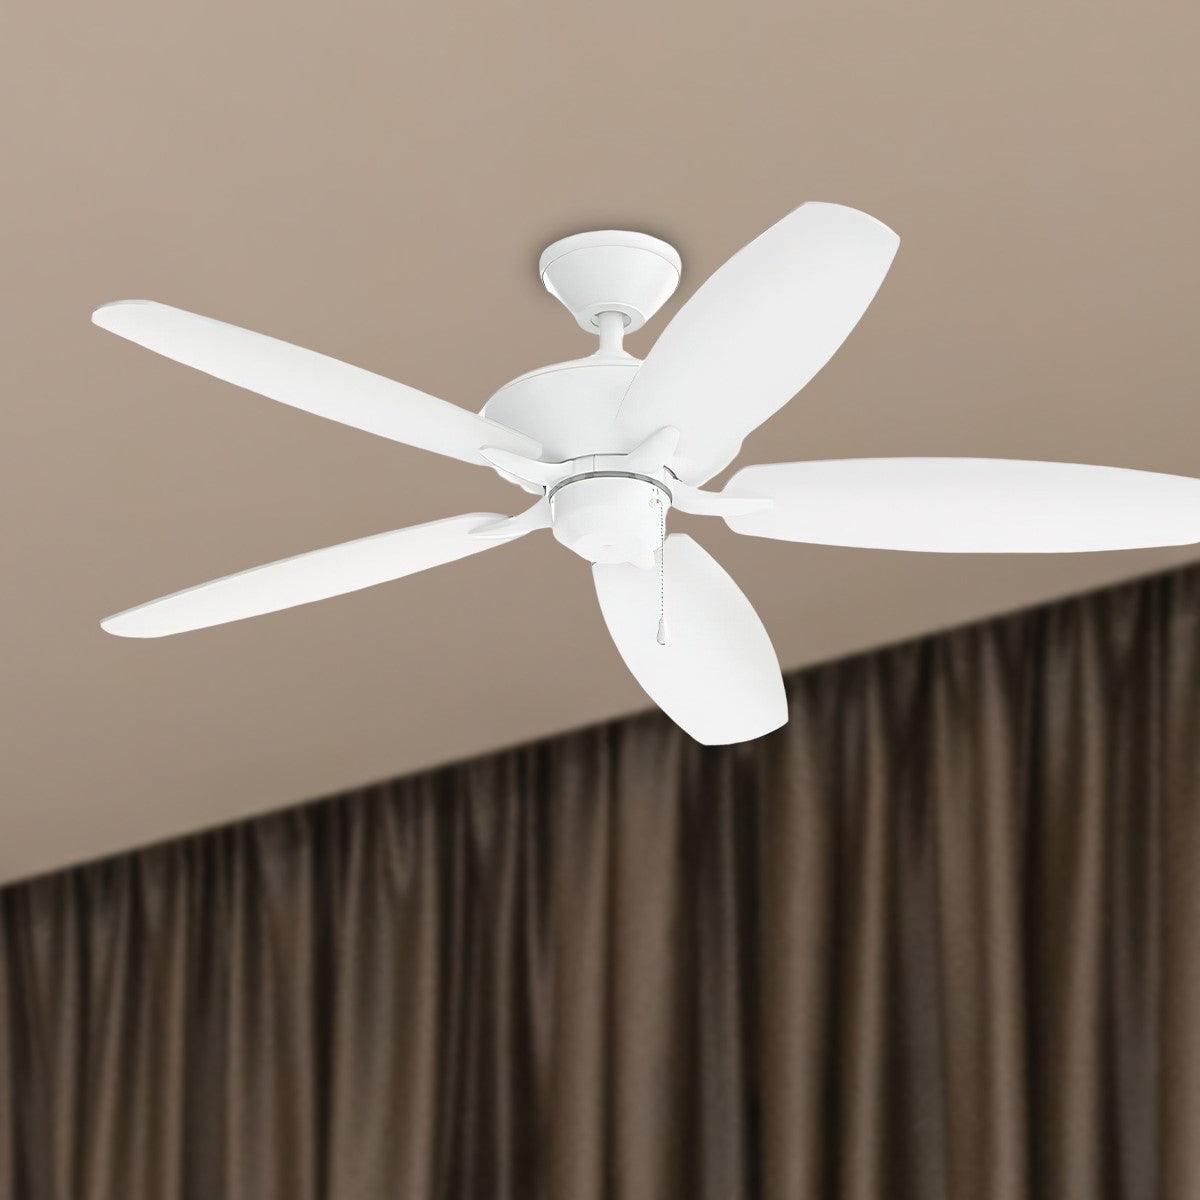 Renew Patio 52 Inch Indoor/Outdoor Ceiling Fan With Pull Chain